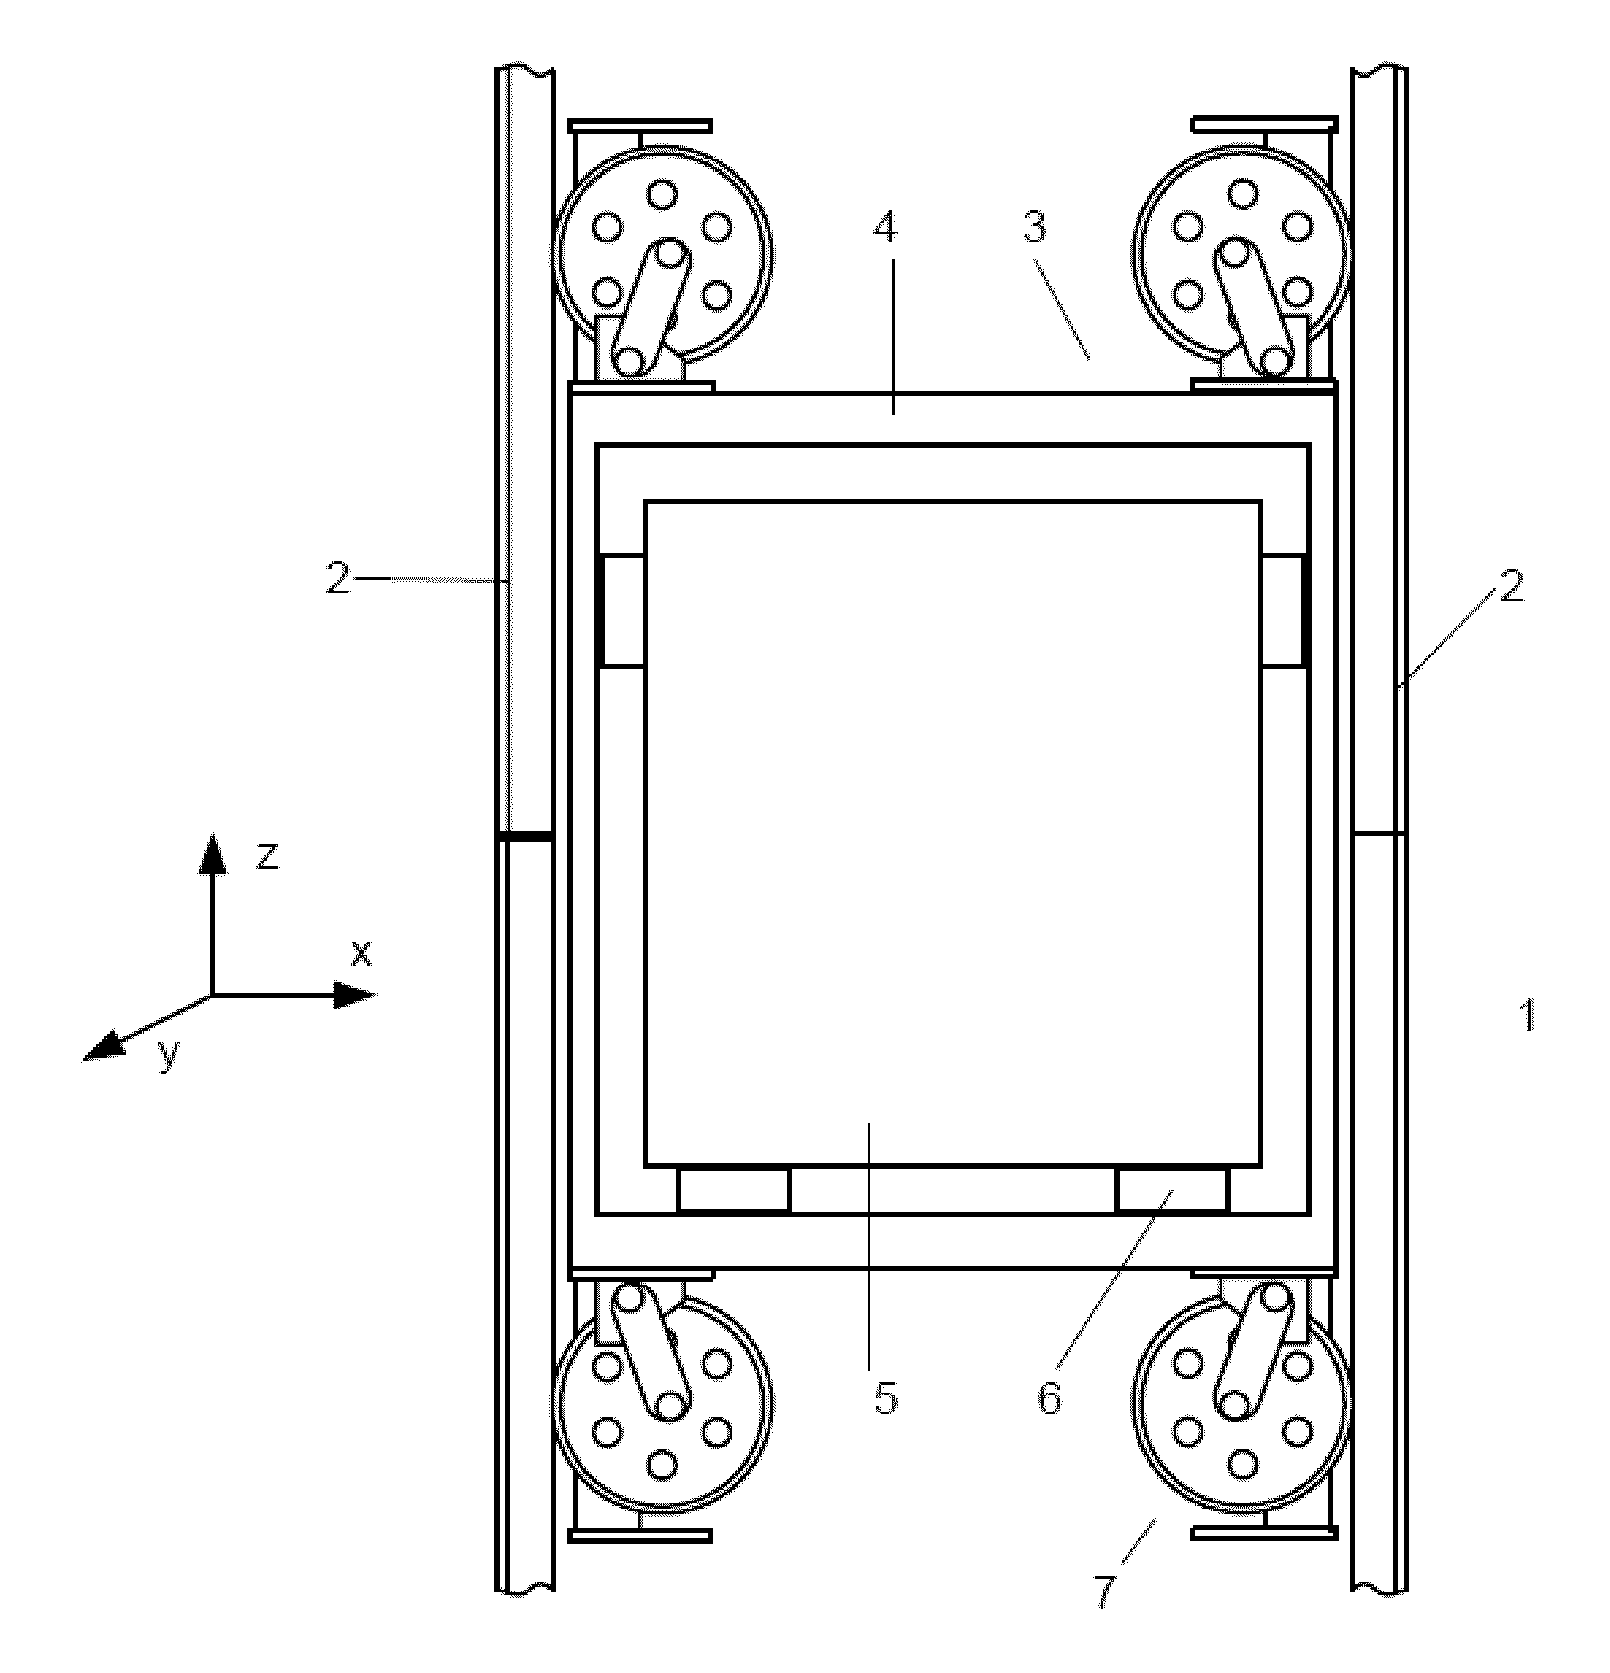 System and method for reducing lateral vibration in elevator systems